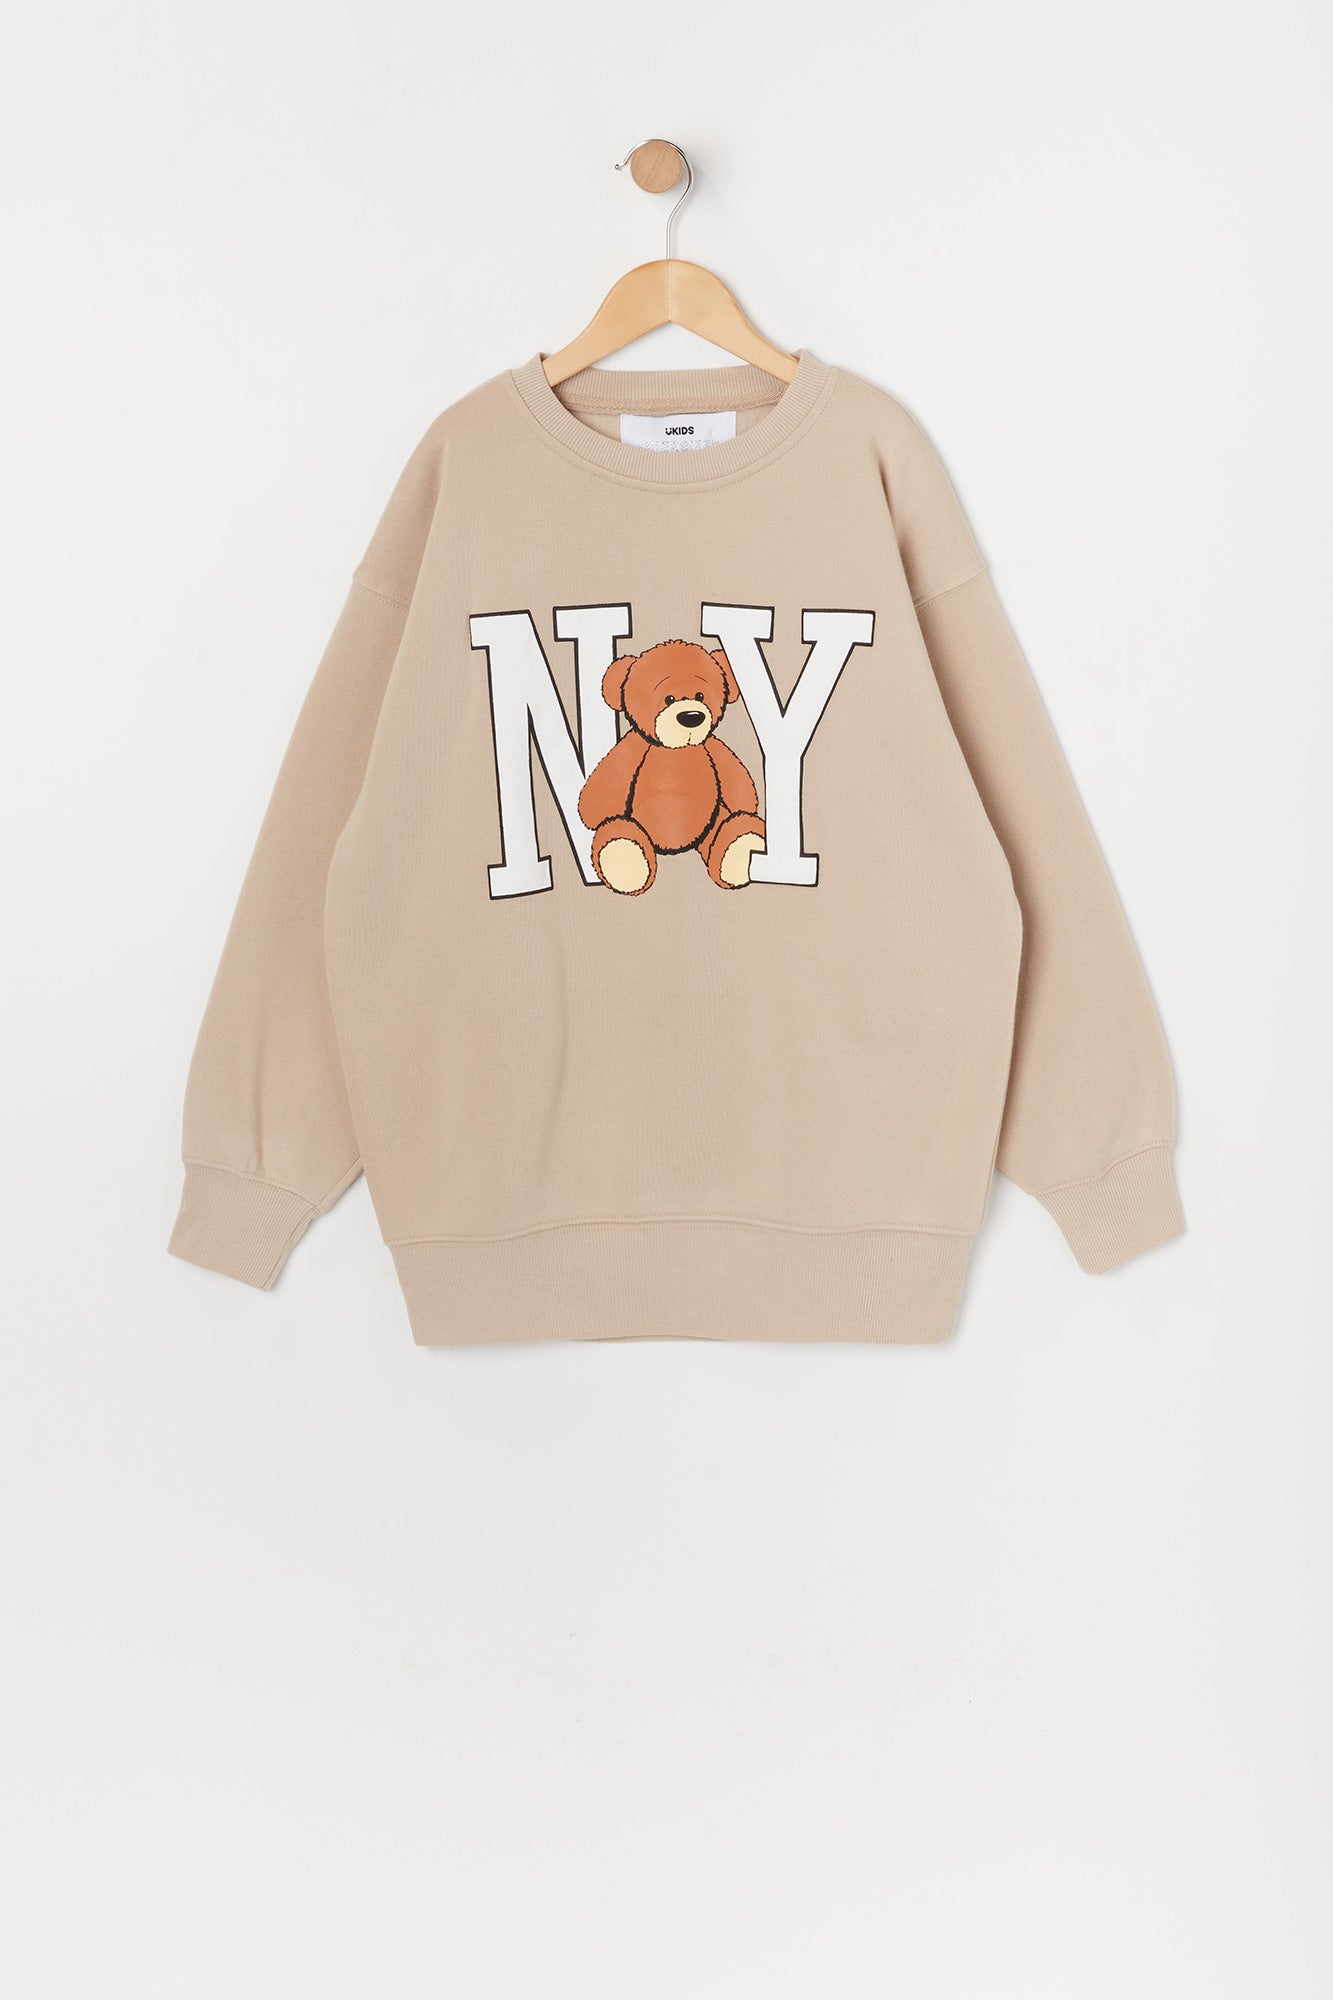 Sweater Graphic – Girls Teddy Planet NY Urban Oversized